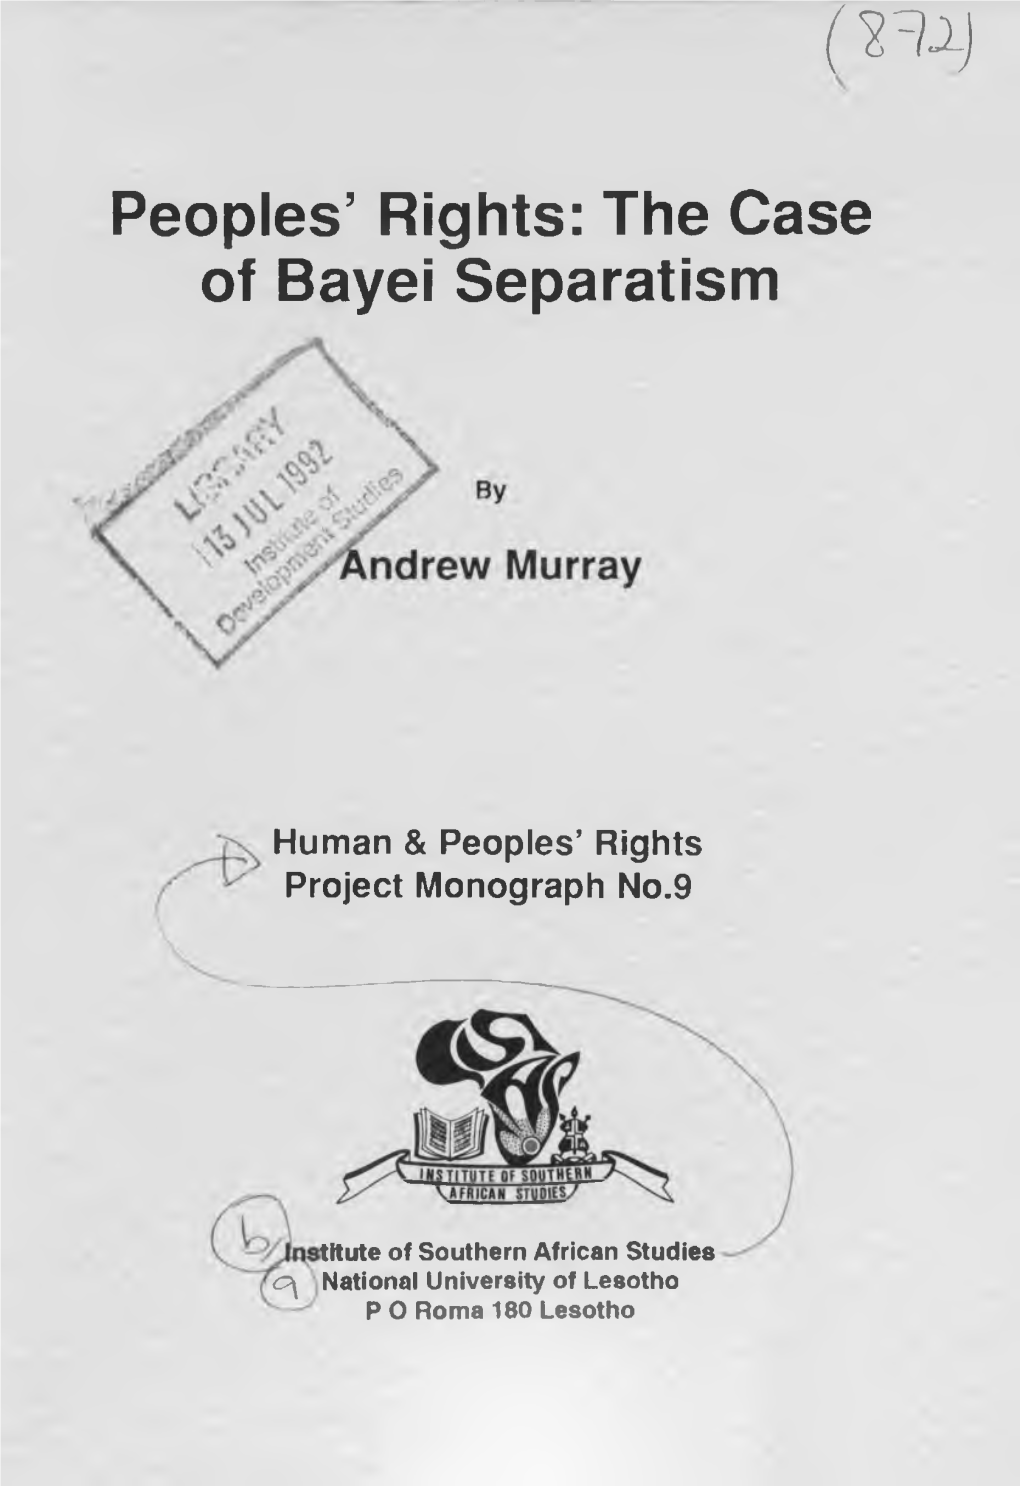 Peoples' Rights: the Case of Bayei Separatism